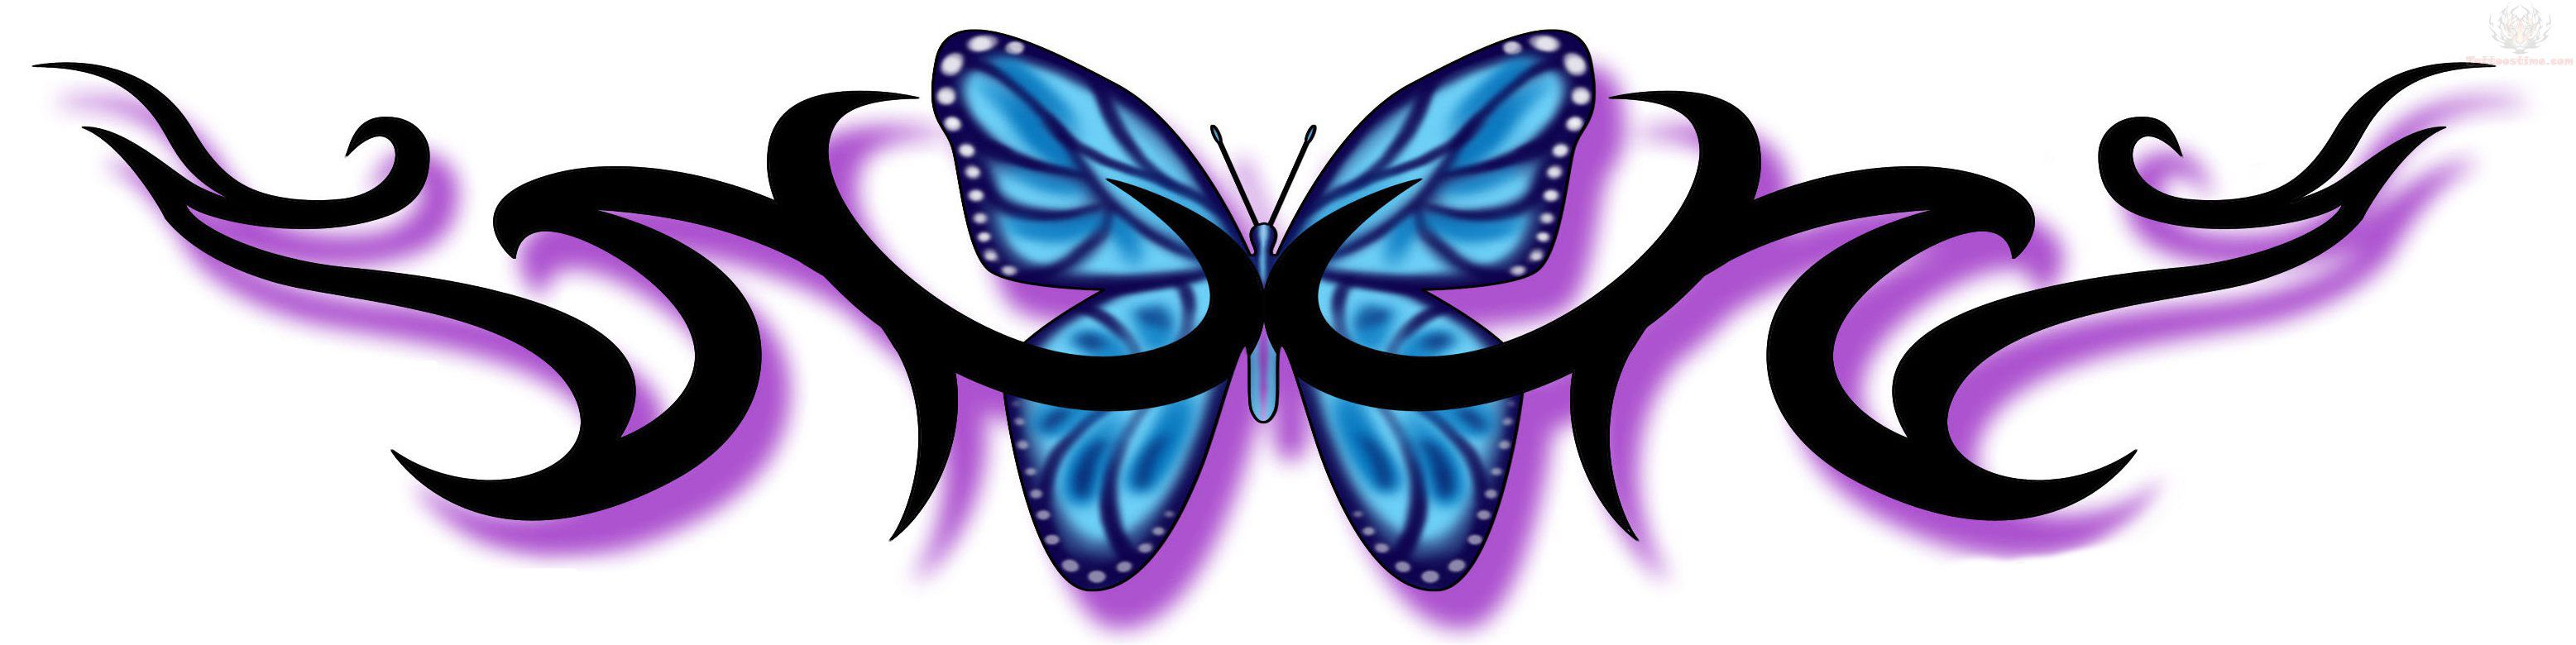 Daintytriballowerbacktattos Blue Butterfly And Tribal within size 3114 X 780